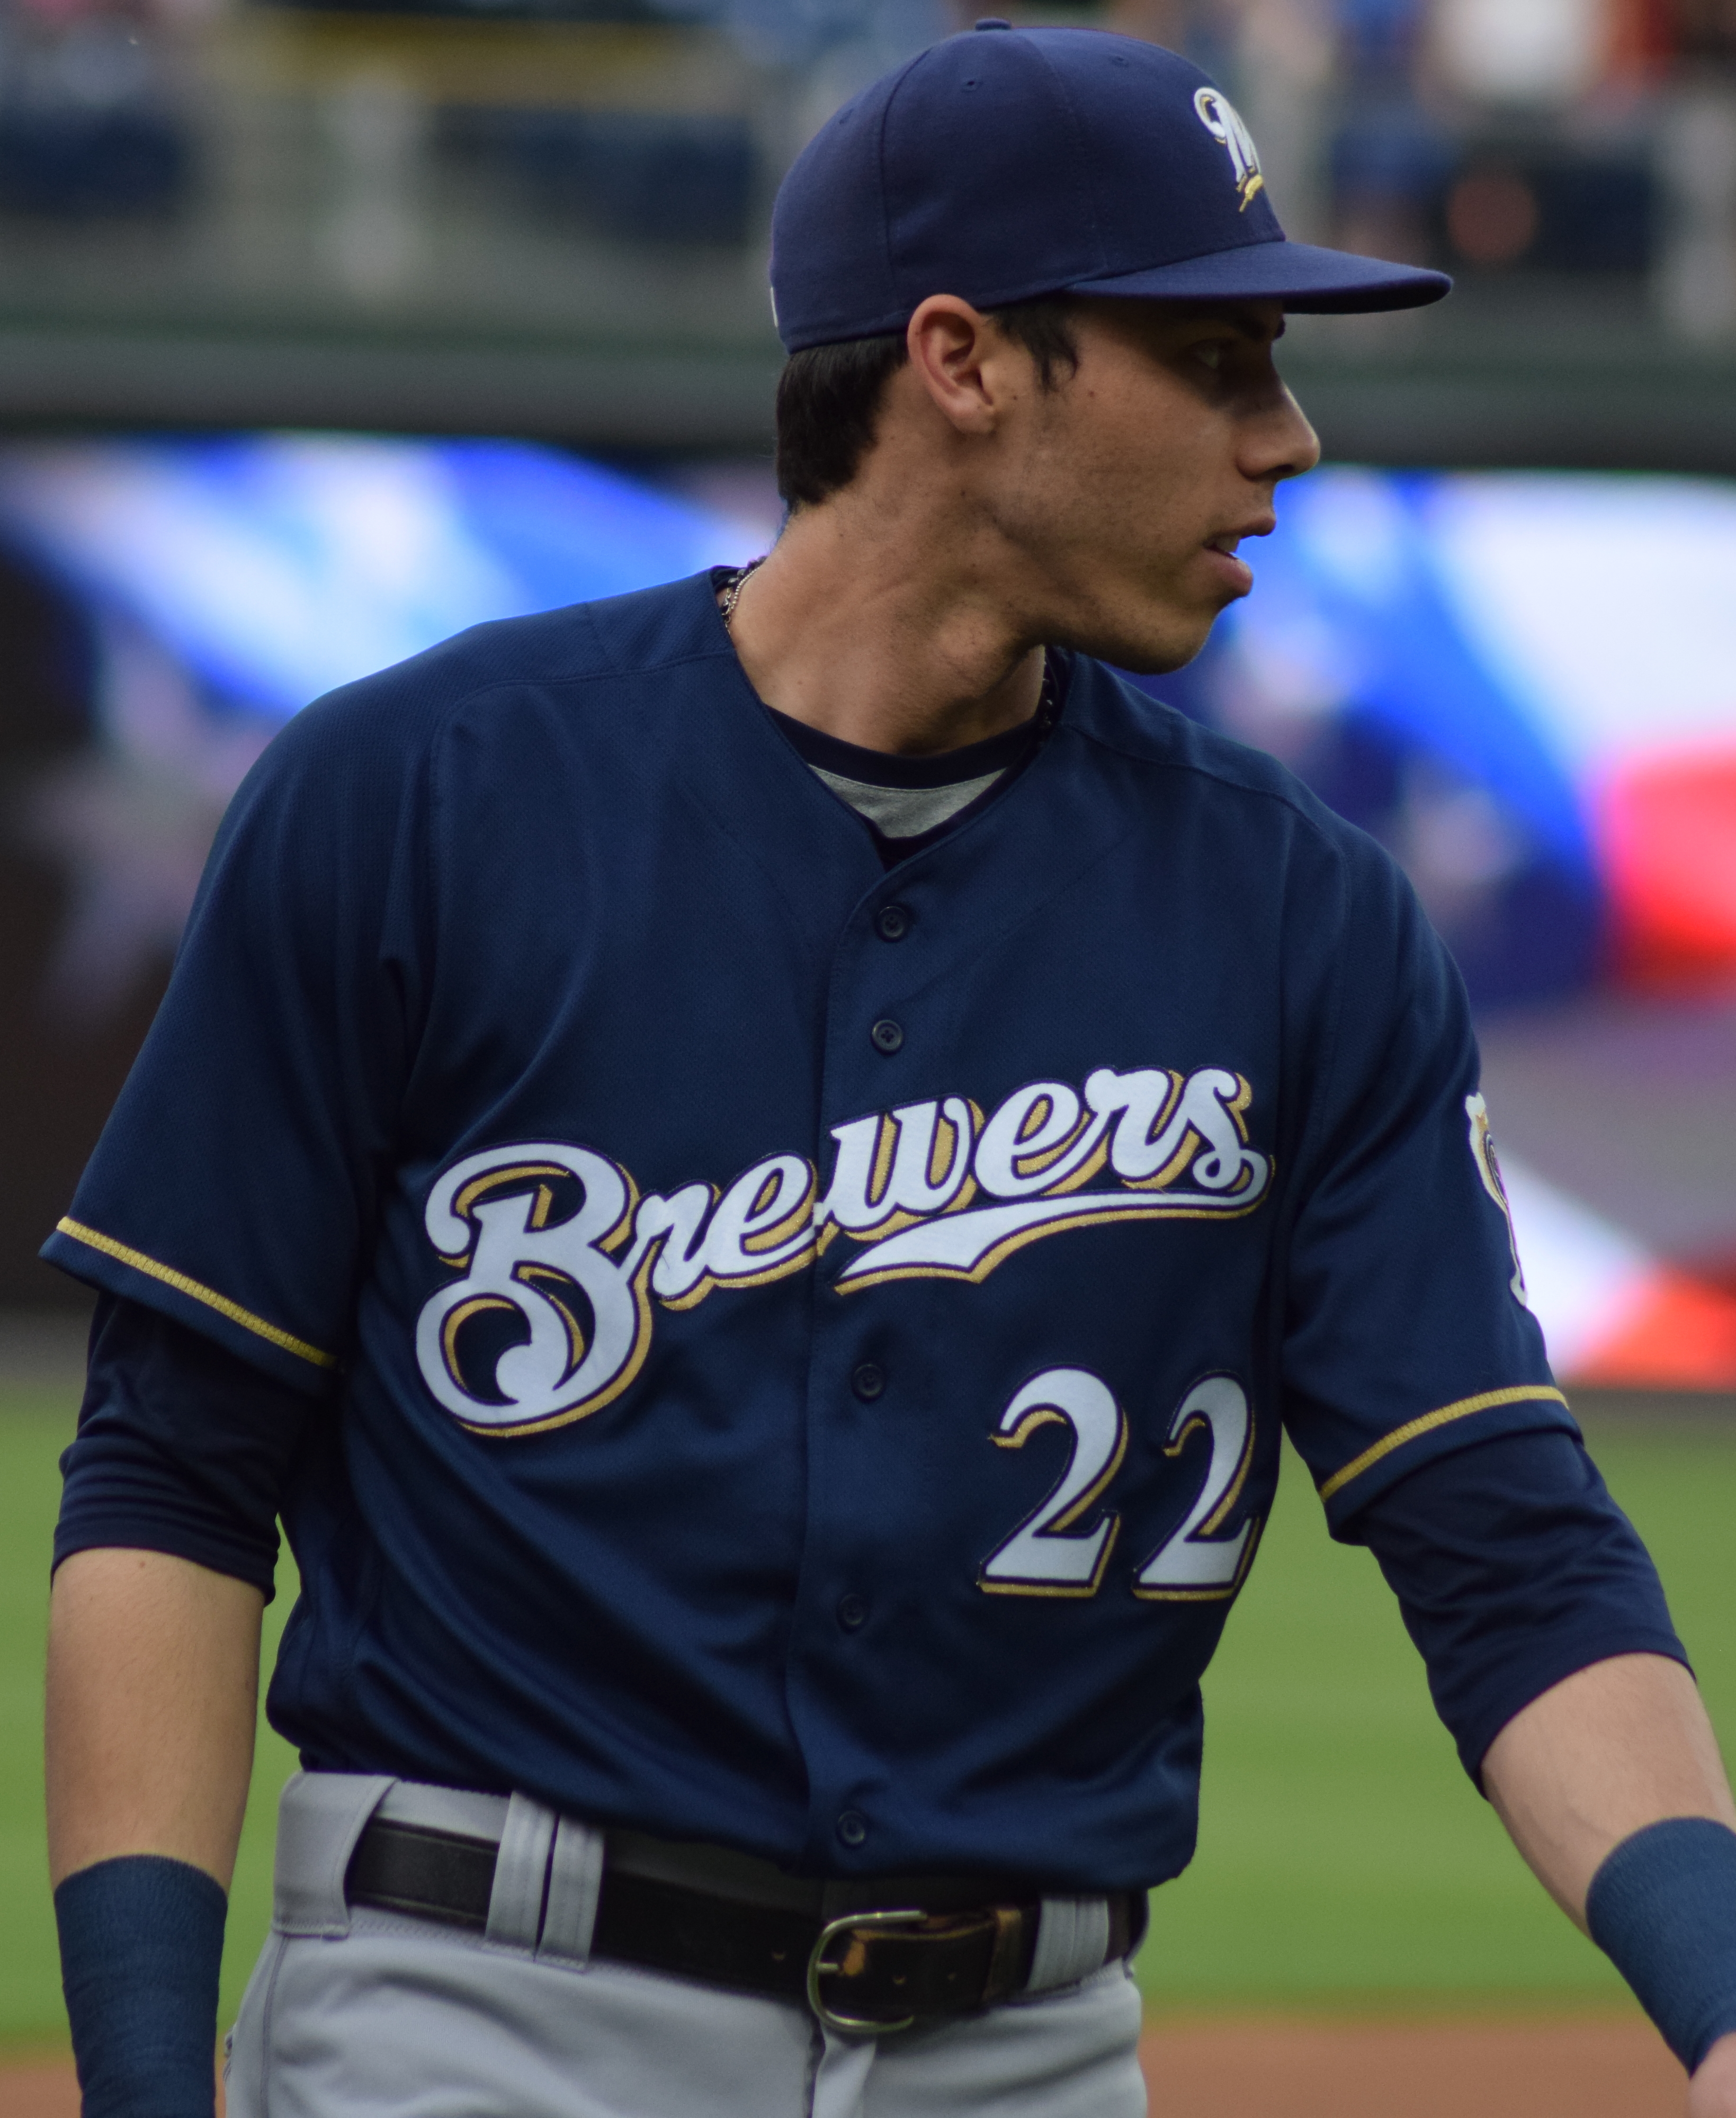 brewers jersey history